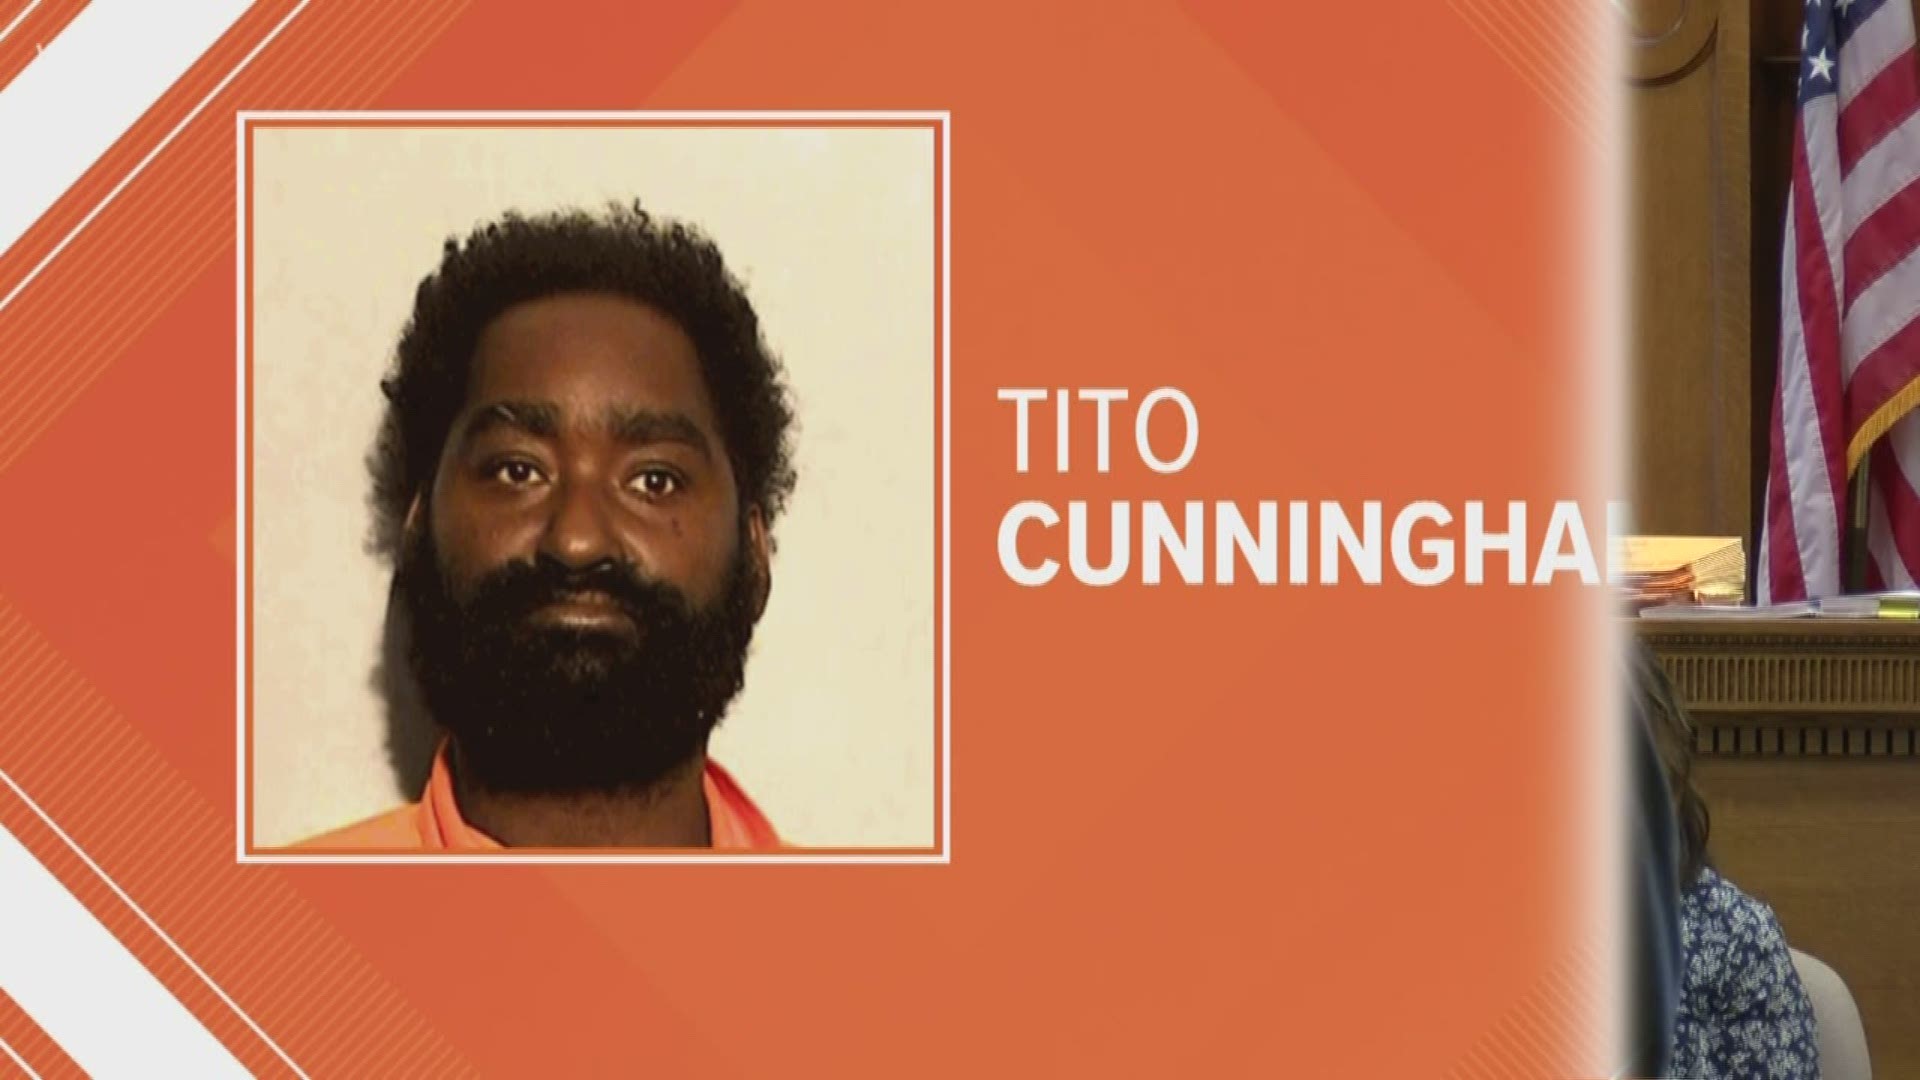 The south Toledo man allegedly entered the home and was looking for cigarettes